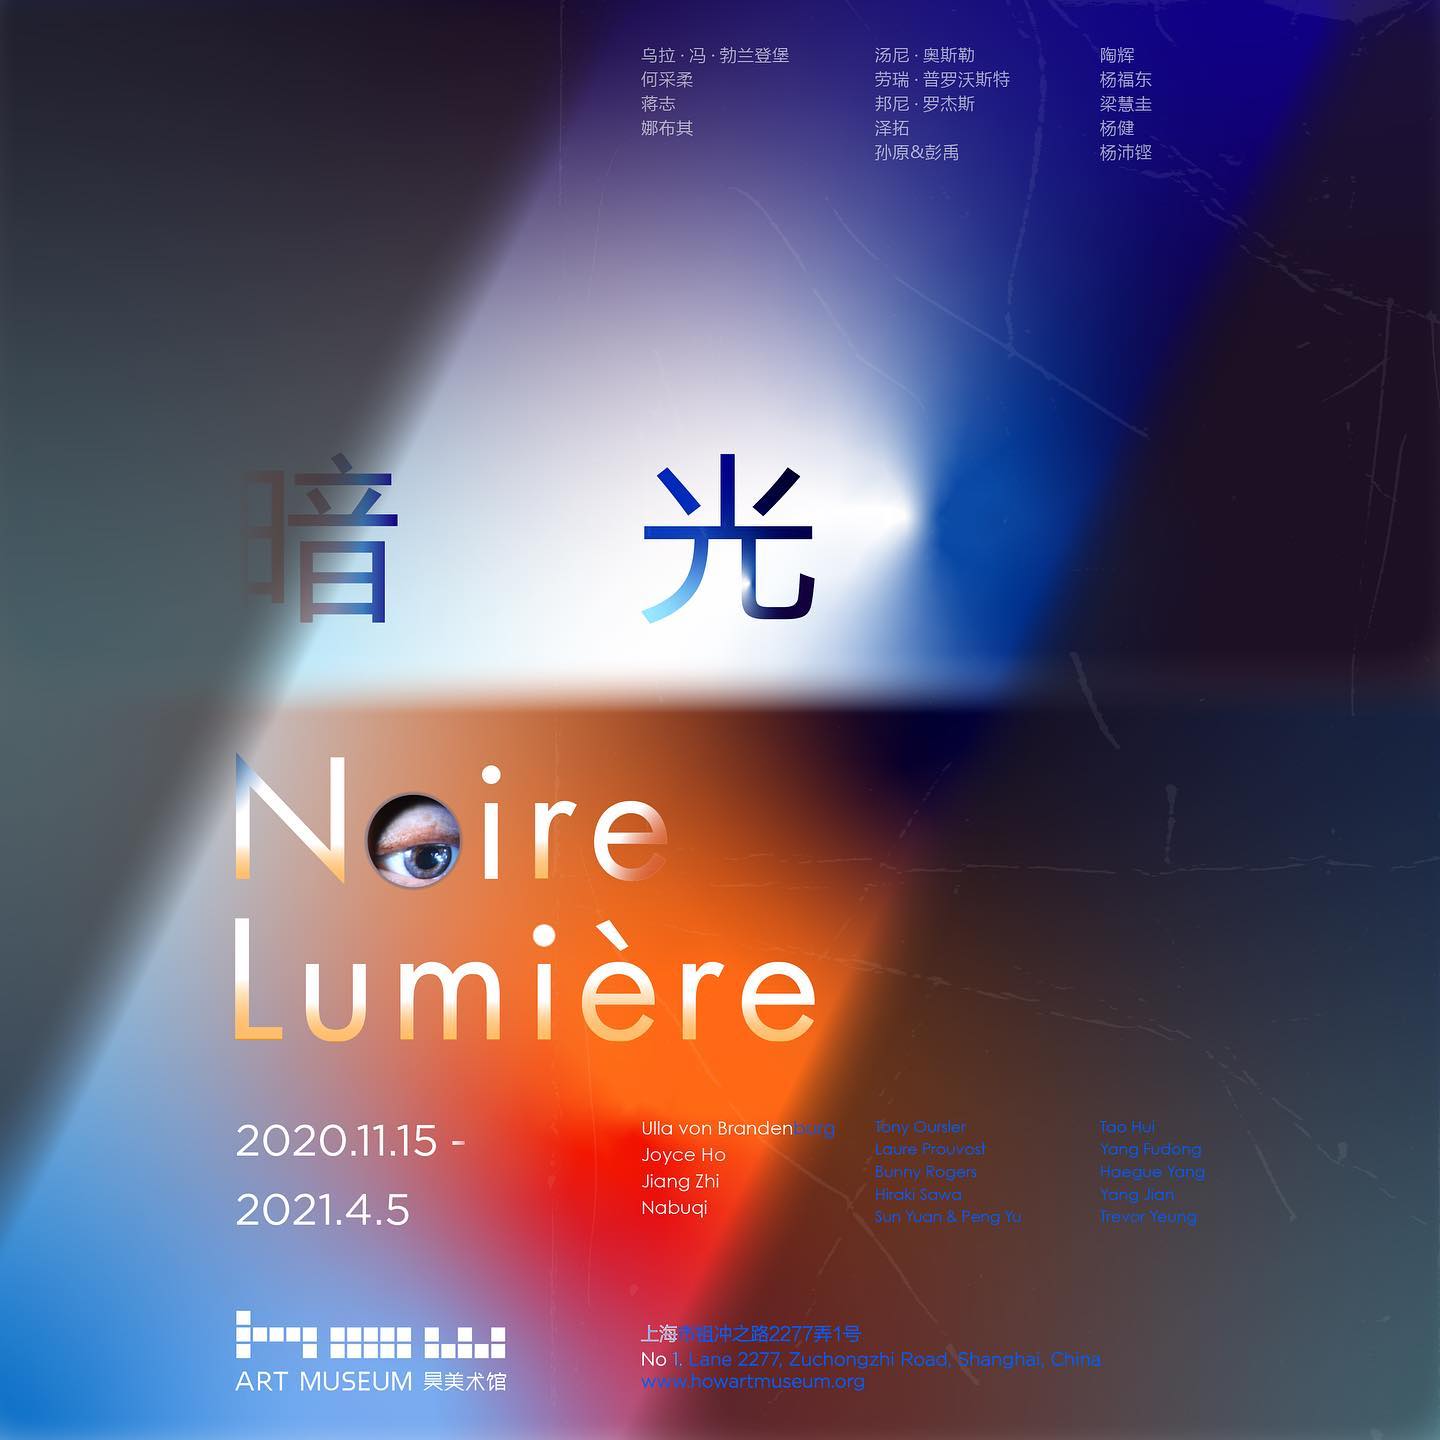 Trevor Yeung and Jiang Zhi participate in group exhibition “Lumiere Noire” at HOW Art Museum